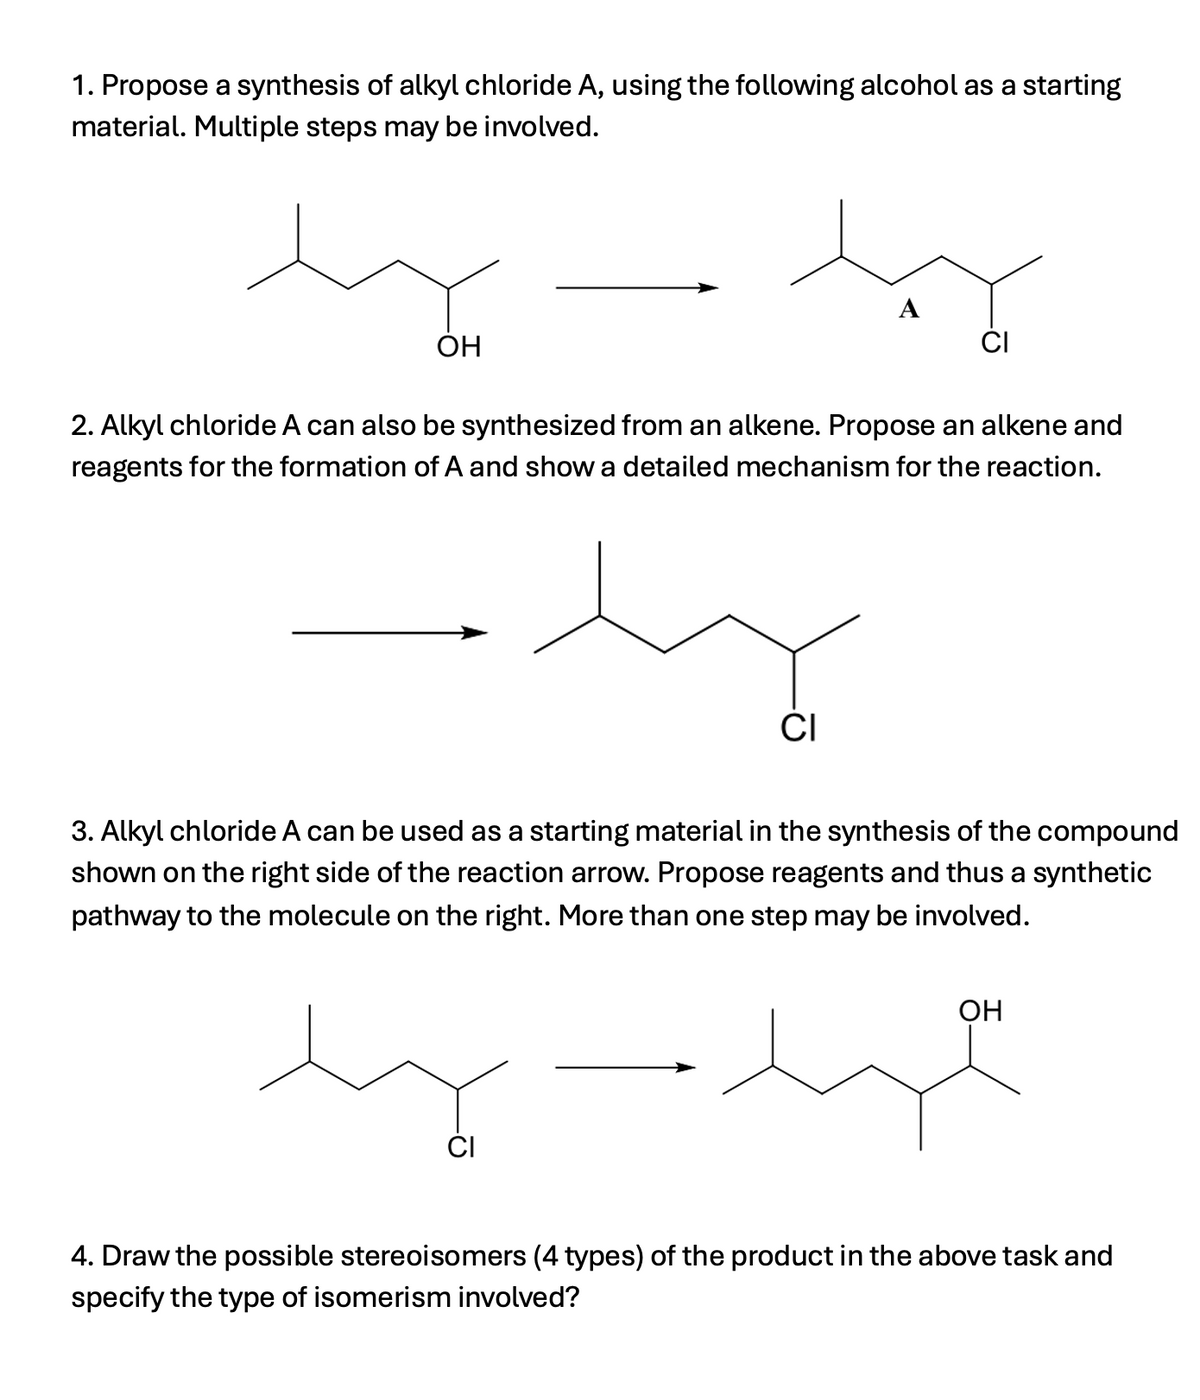 1. Propose a synthesis of alkyl chloride A, using the following alcohol as a starting
material. Multiple steps may be involved.
OH
A
CI
2. Alkyl chloride A can also be synthesized from an alkene. Propose an alkene and
reagents for the formation of A and show a detailed mechanism for the reaction.
상
CI
3. Alkyl chloride A can be used as a starting material in the synthesis of the compound
shown on the right side of the reaction arrow. Propose reagents and thus a synthetic
pathway to the molecule on the right. More than one step may be involved.
OH
مهده ہند
CI
4. Draw the possible stereoisomers (4 types) of the product in the above task and
specify the type of isomerism involved?